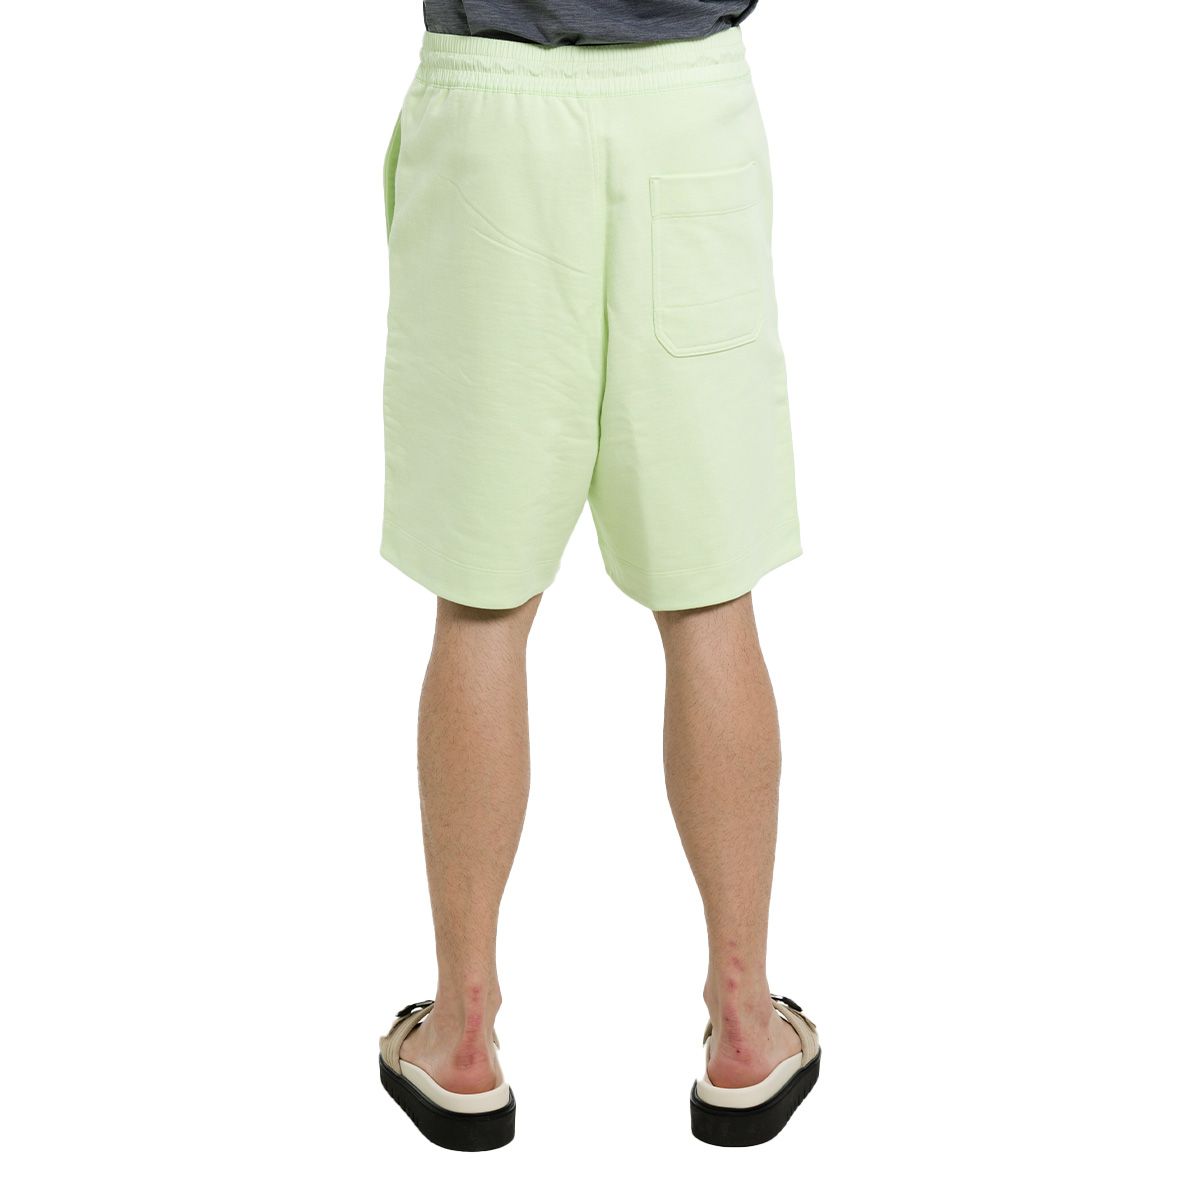 Knee Lenght Lime Cotton Shorts